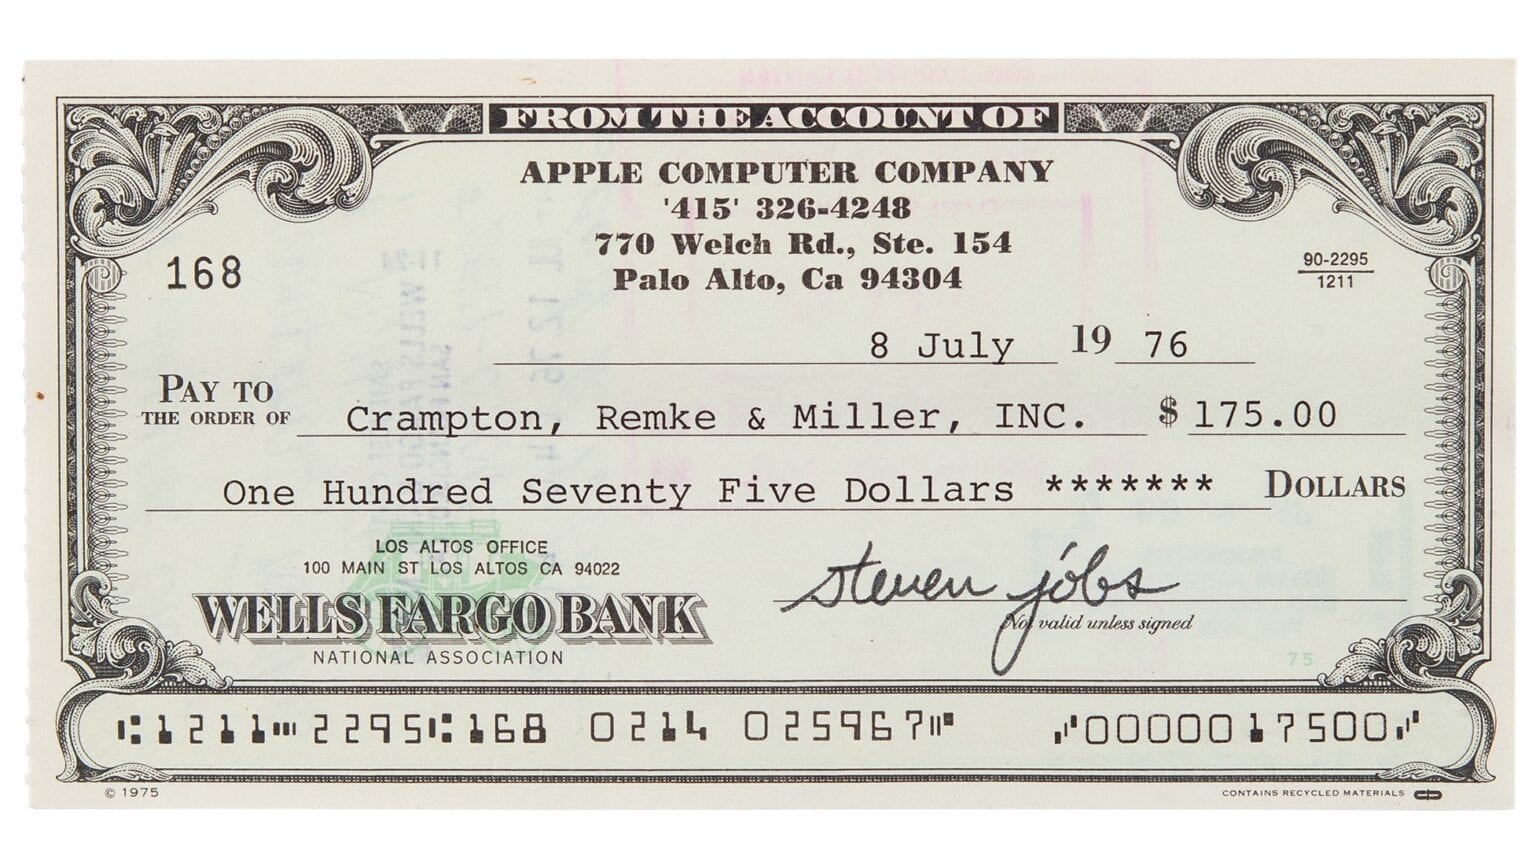 Bid on check signed by Steve Jobs to own piece of Apple history